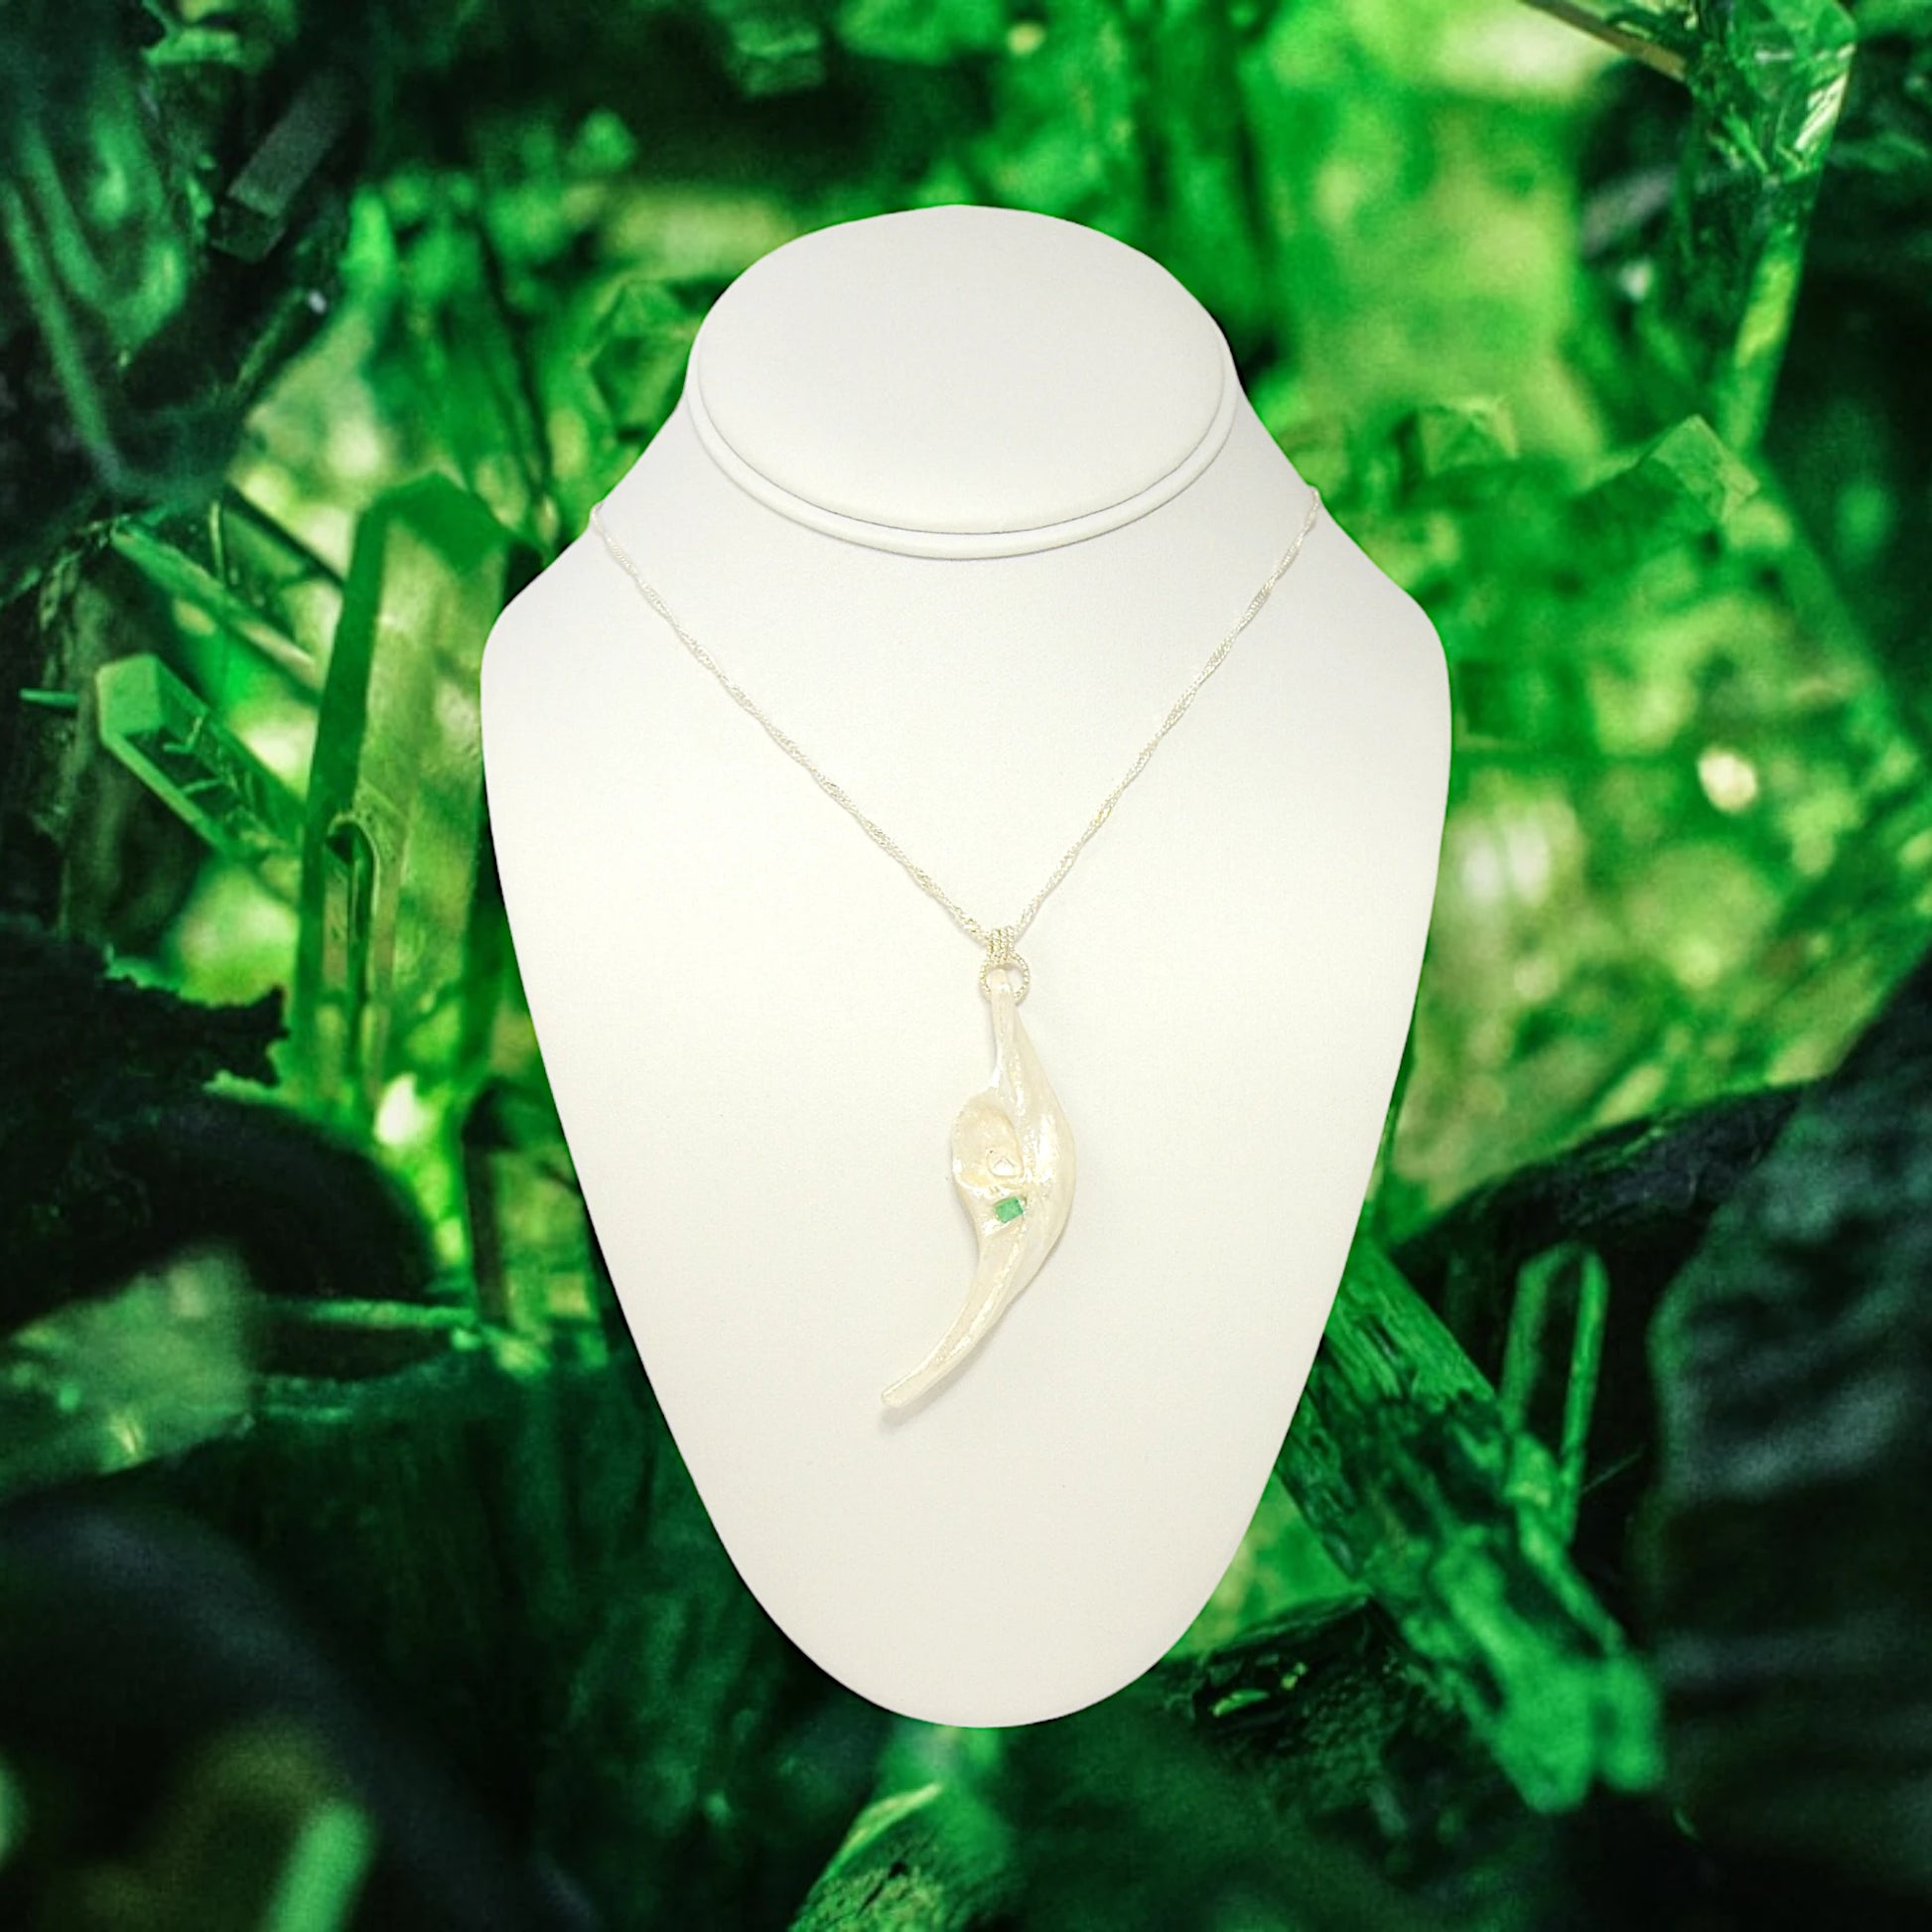 Empress natural seashell pendant with a Herkimer Diamond and Emerald. The pendant is hanging from a chain on a white necklace displayer with emerald gemstones in the background.